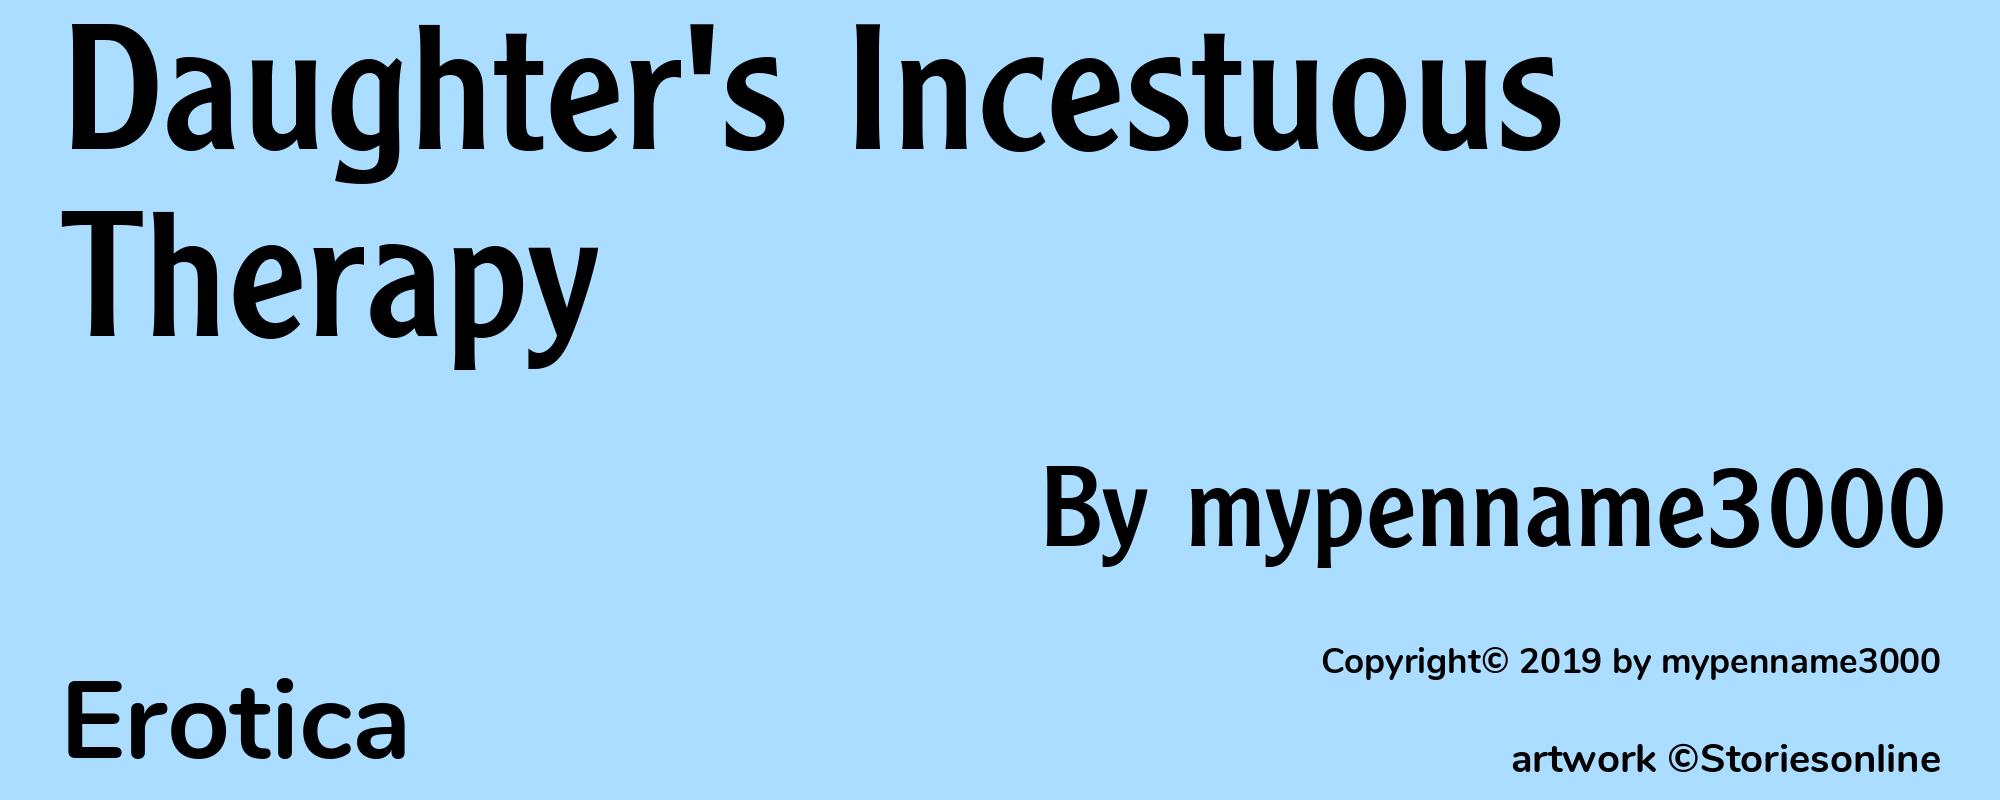 Daughter's Incestuous Therapy - Cover